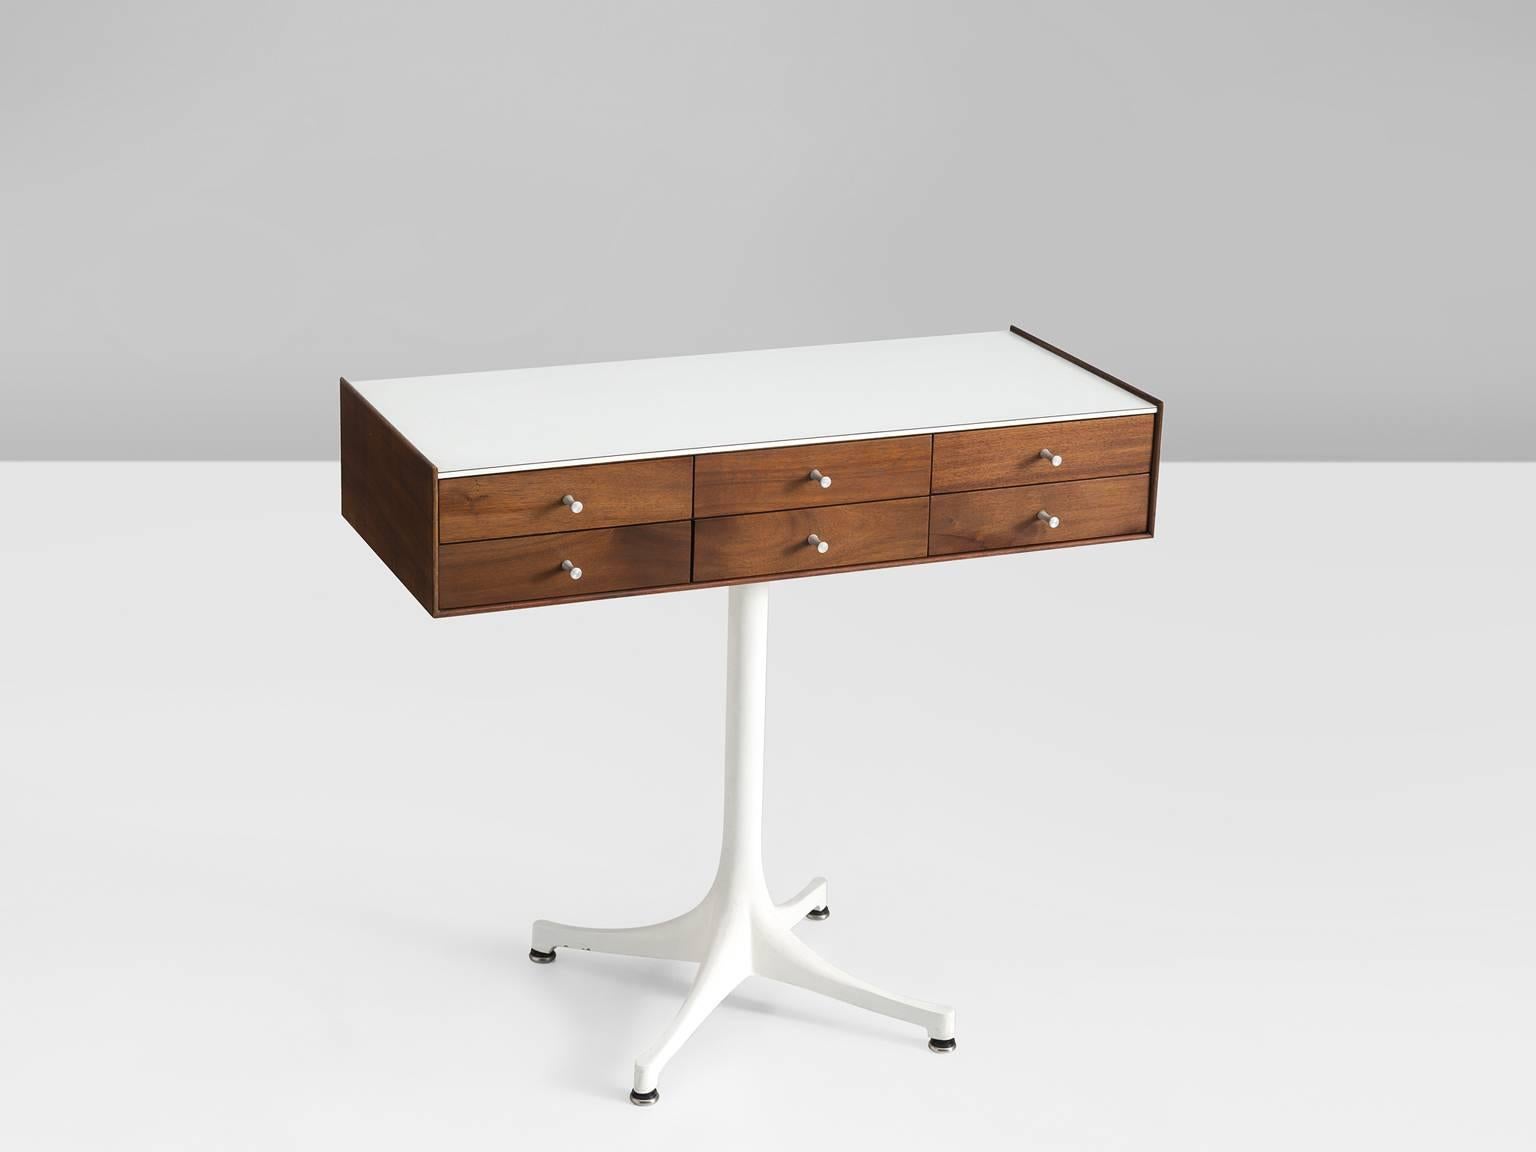 George Nelson for Herman Miller, miniature chest 5212, walnut, laminate and aluminum, United States, 1952.

This elegant small storage piece has a rectangular volume and is devided with six drawers with small white knobs on the front. The white